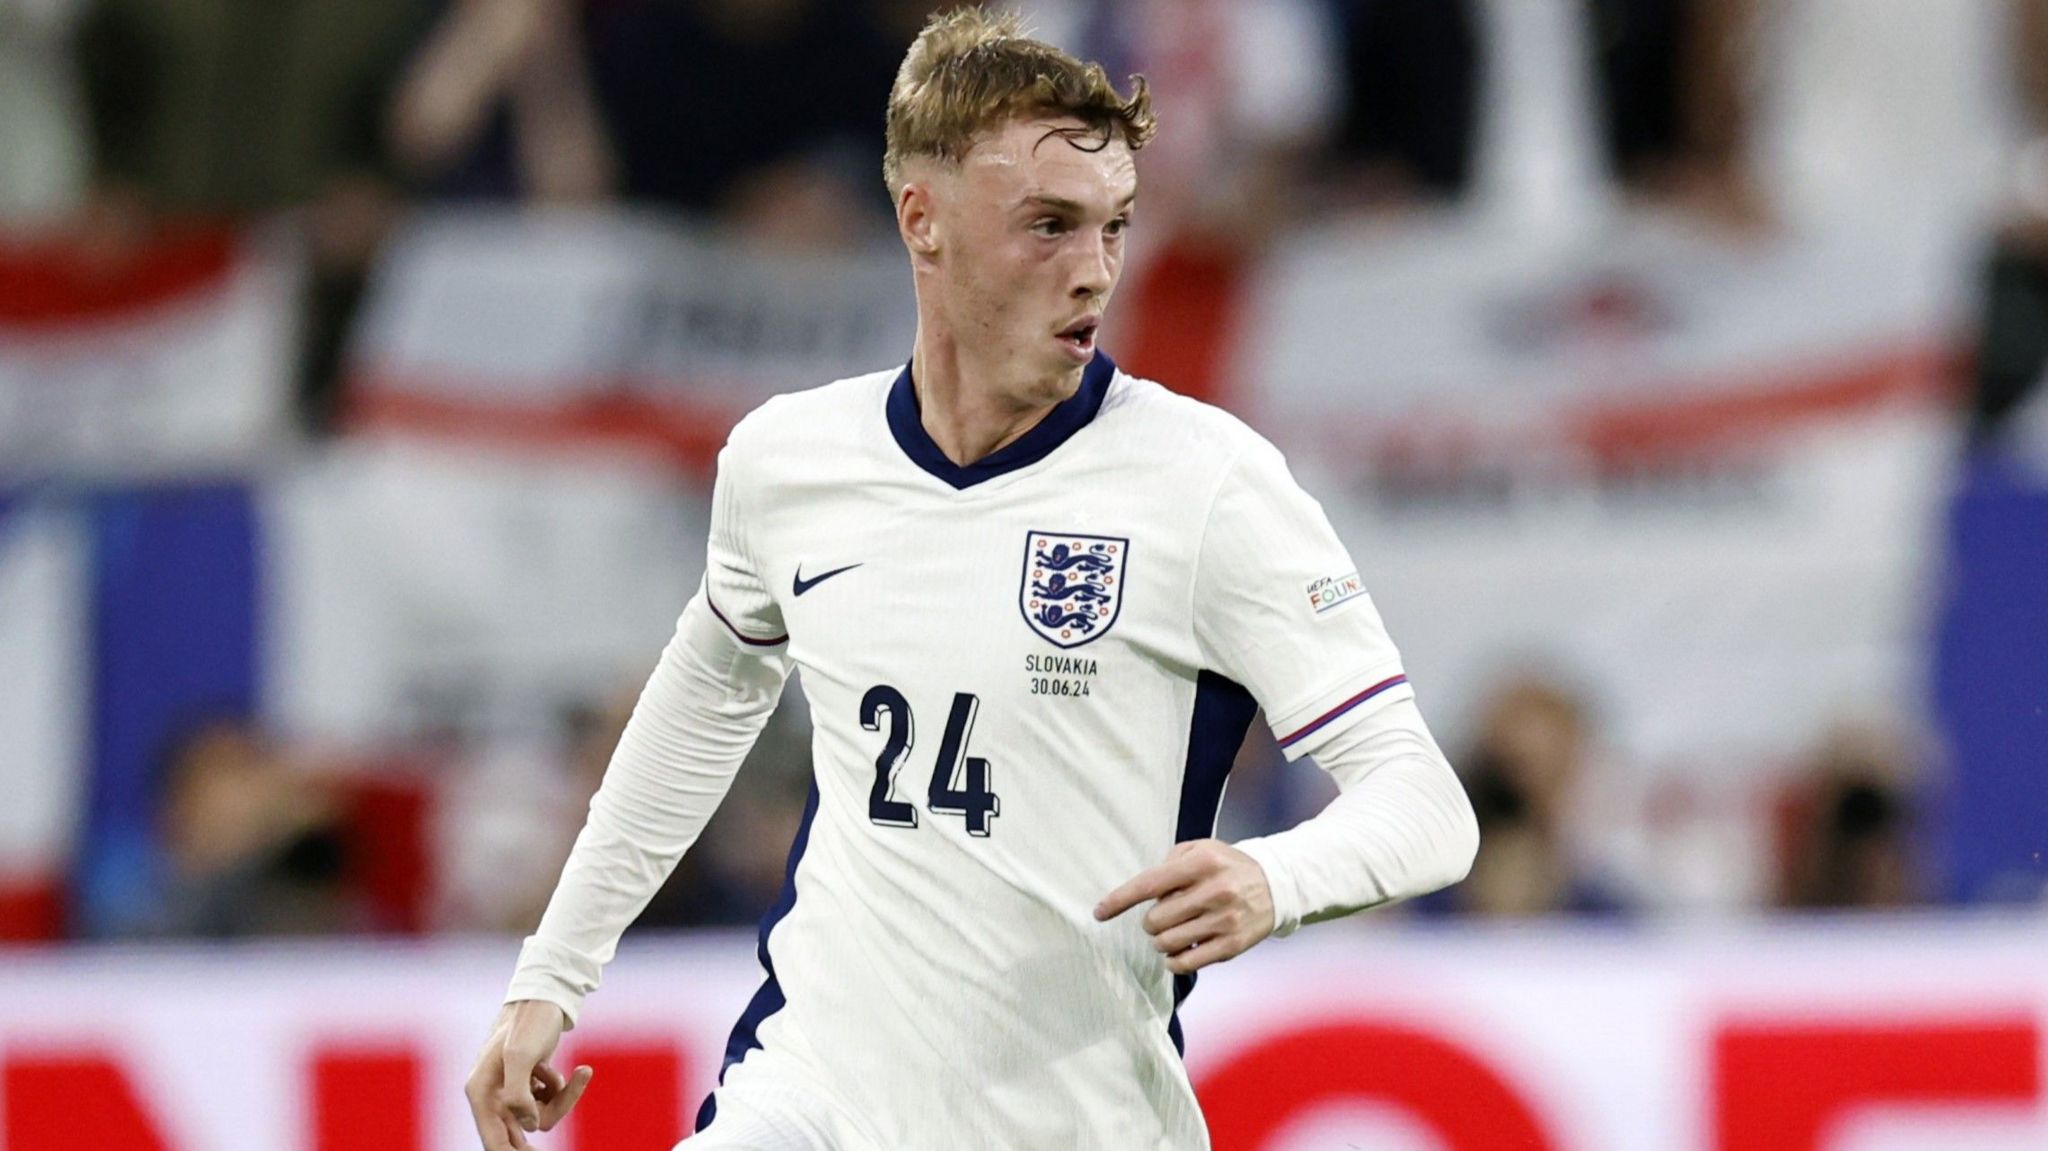 Cole Palmer in action for England against Slovakia.